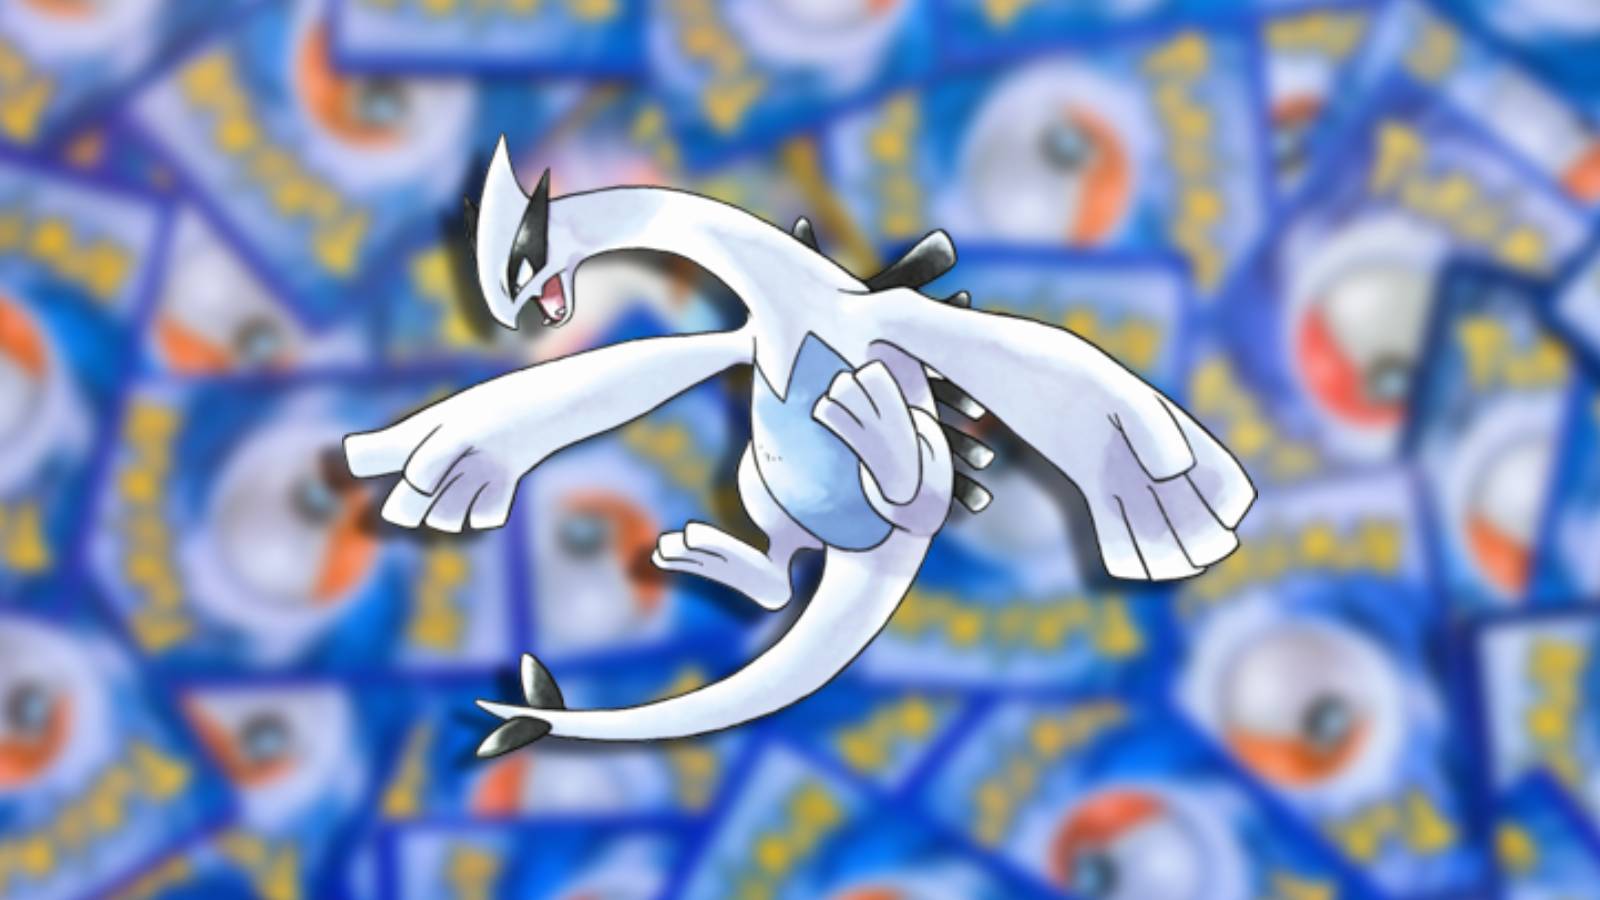 The Pokemon Lugia appears against a blurred background